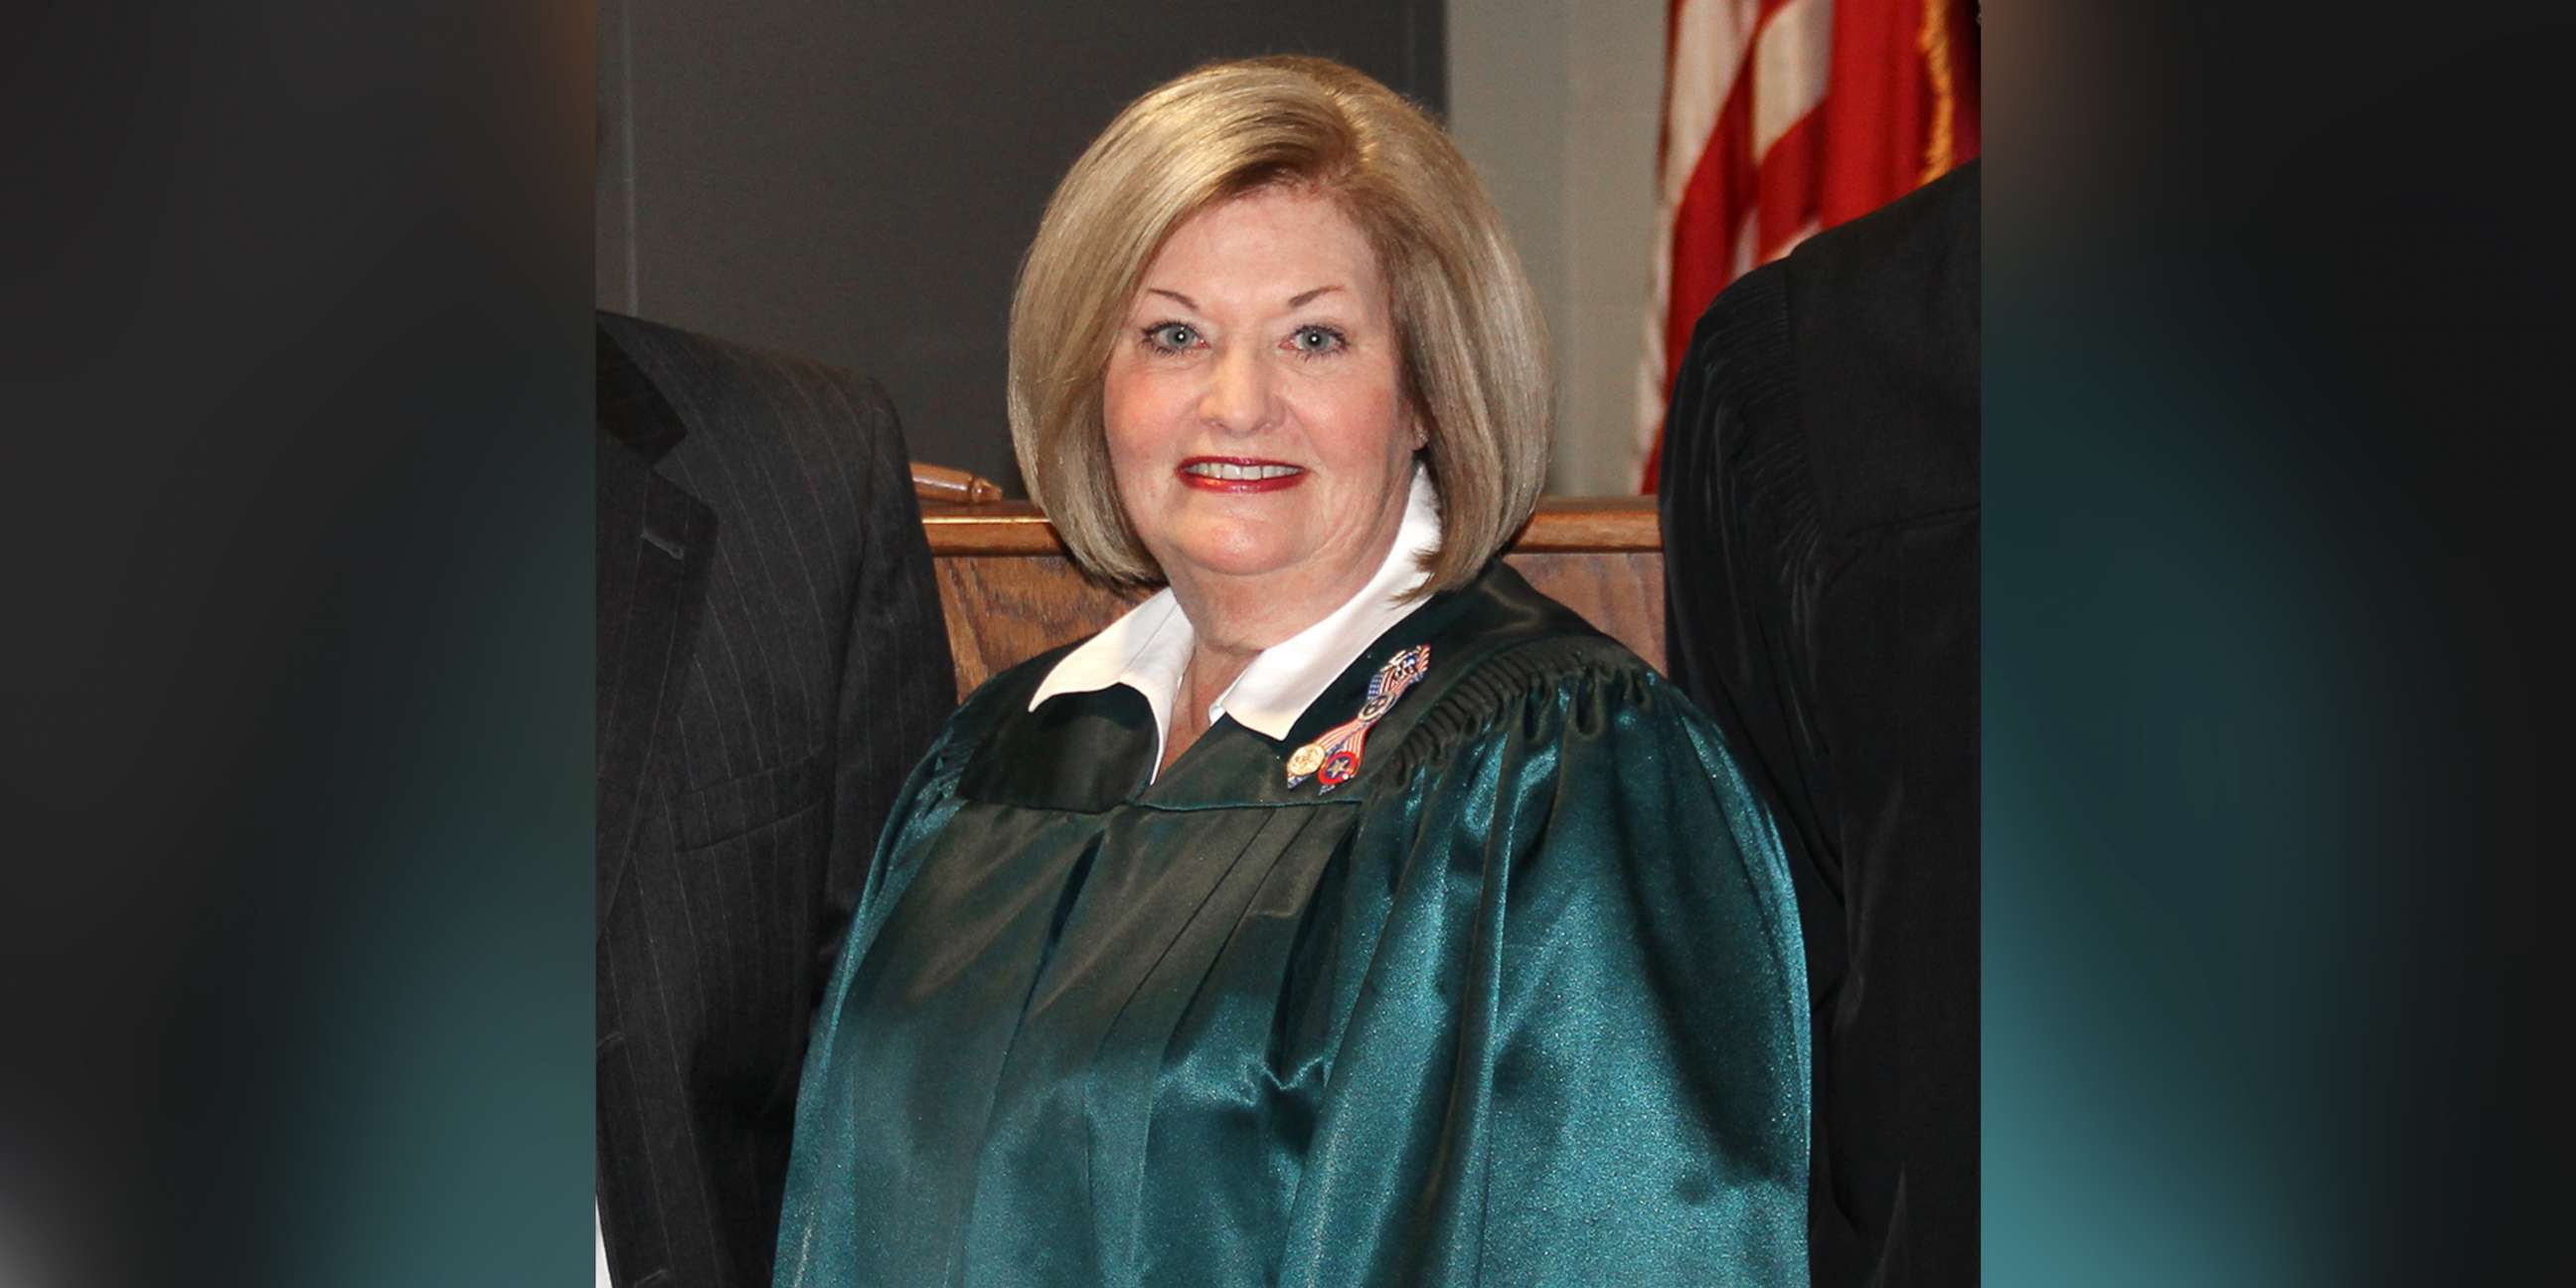 PHOTO: Rutherford County Juvenile Court Judge Donna Scott Davenport is pictured in an undated image published on the official website of Rutherford County, Tenn.